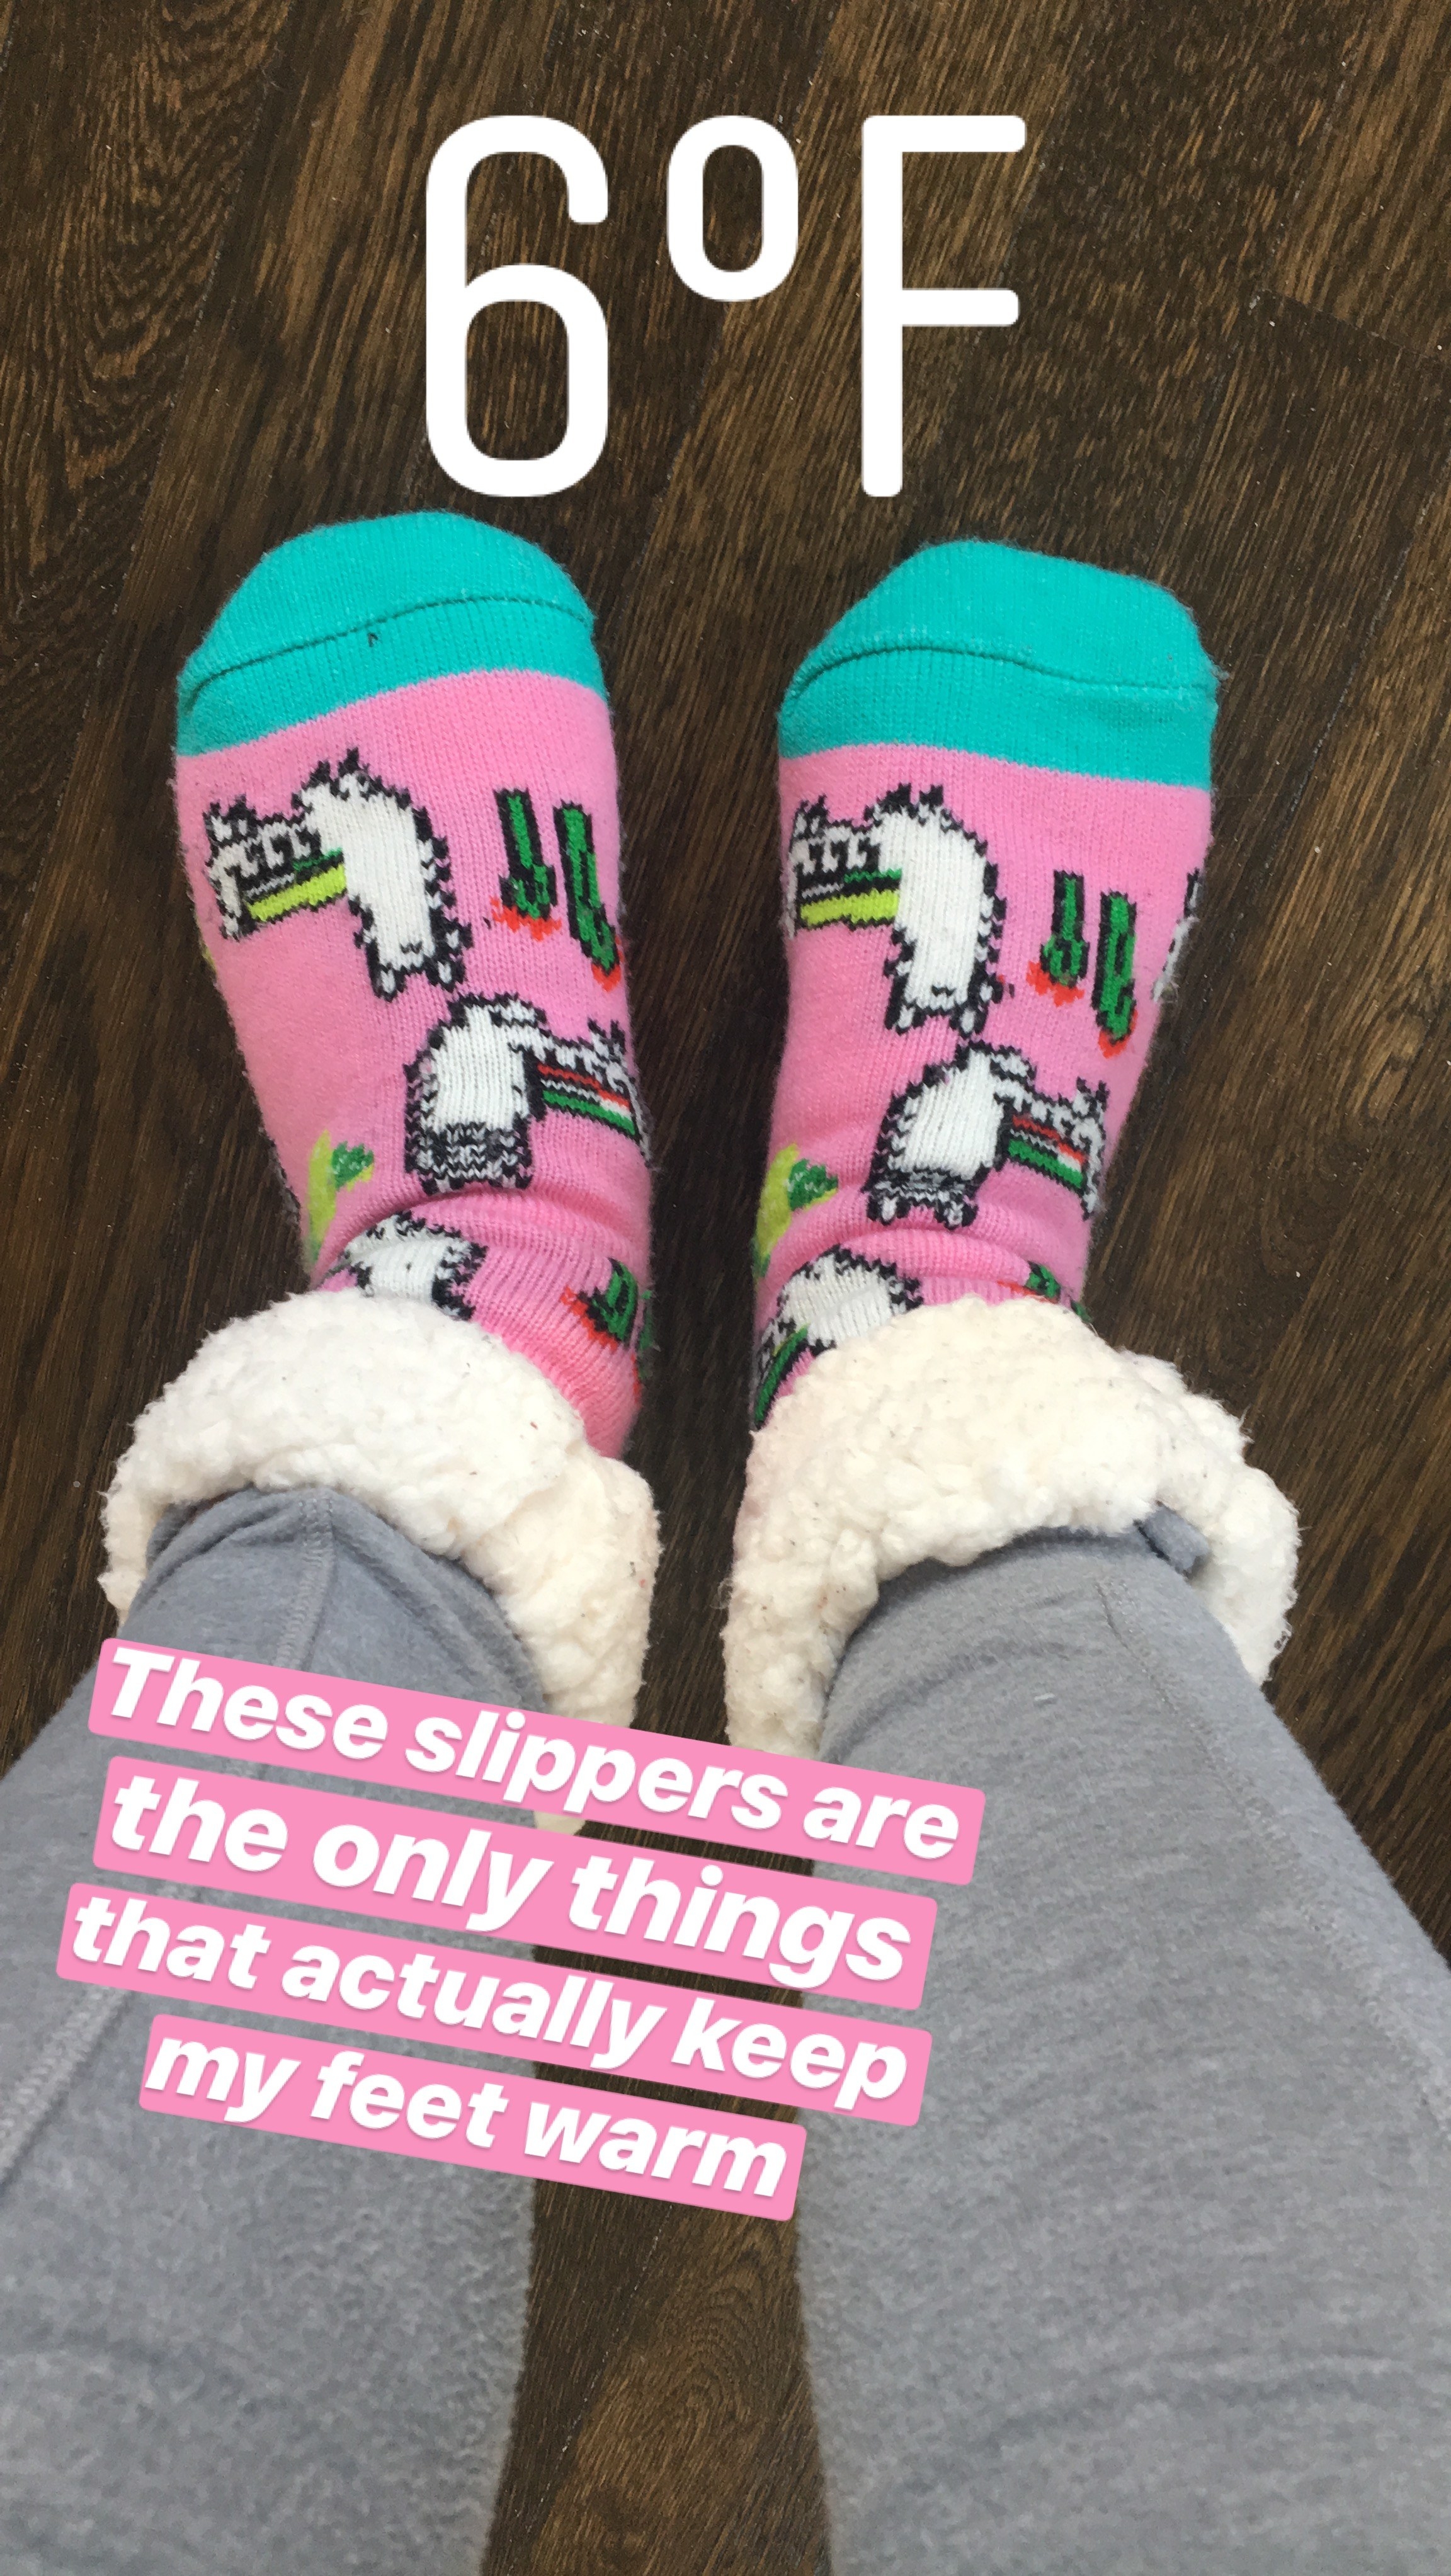 My feet in the socks, cuffed to show the sherpa lining with text to show it was 6 degrees fahrenheit at the time of the photo and saying &quot;these slippers are the only things that actually keep my feet warm&quot;